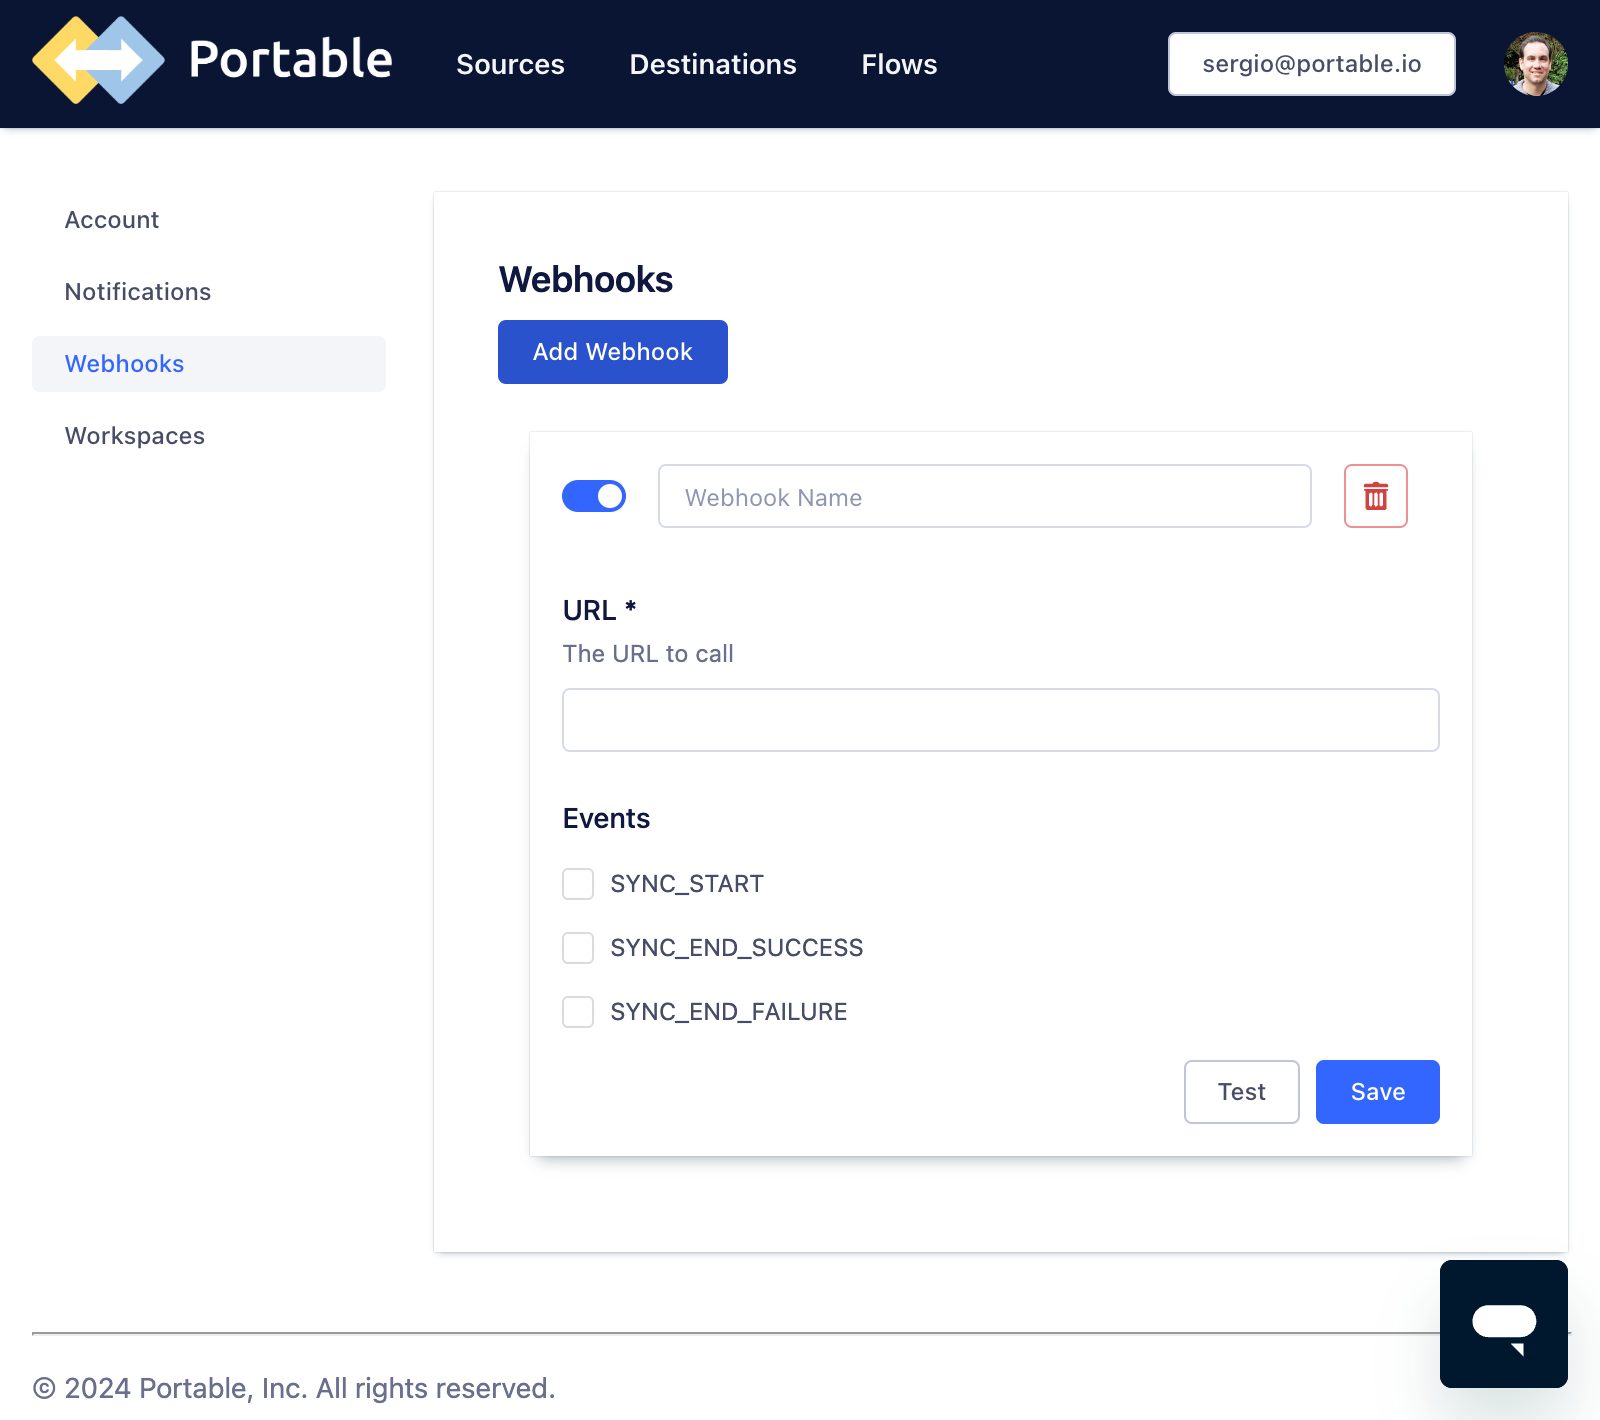 New Webhook in Portable